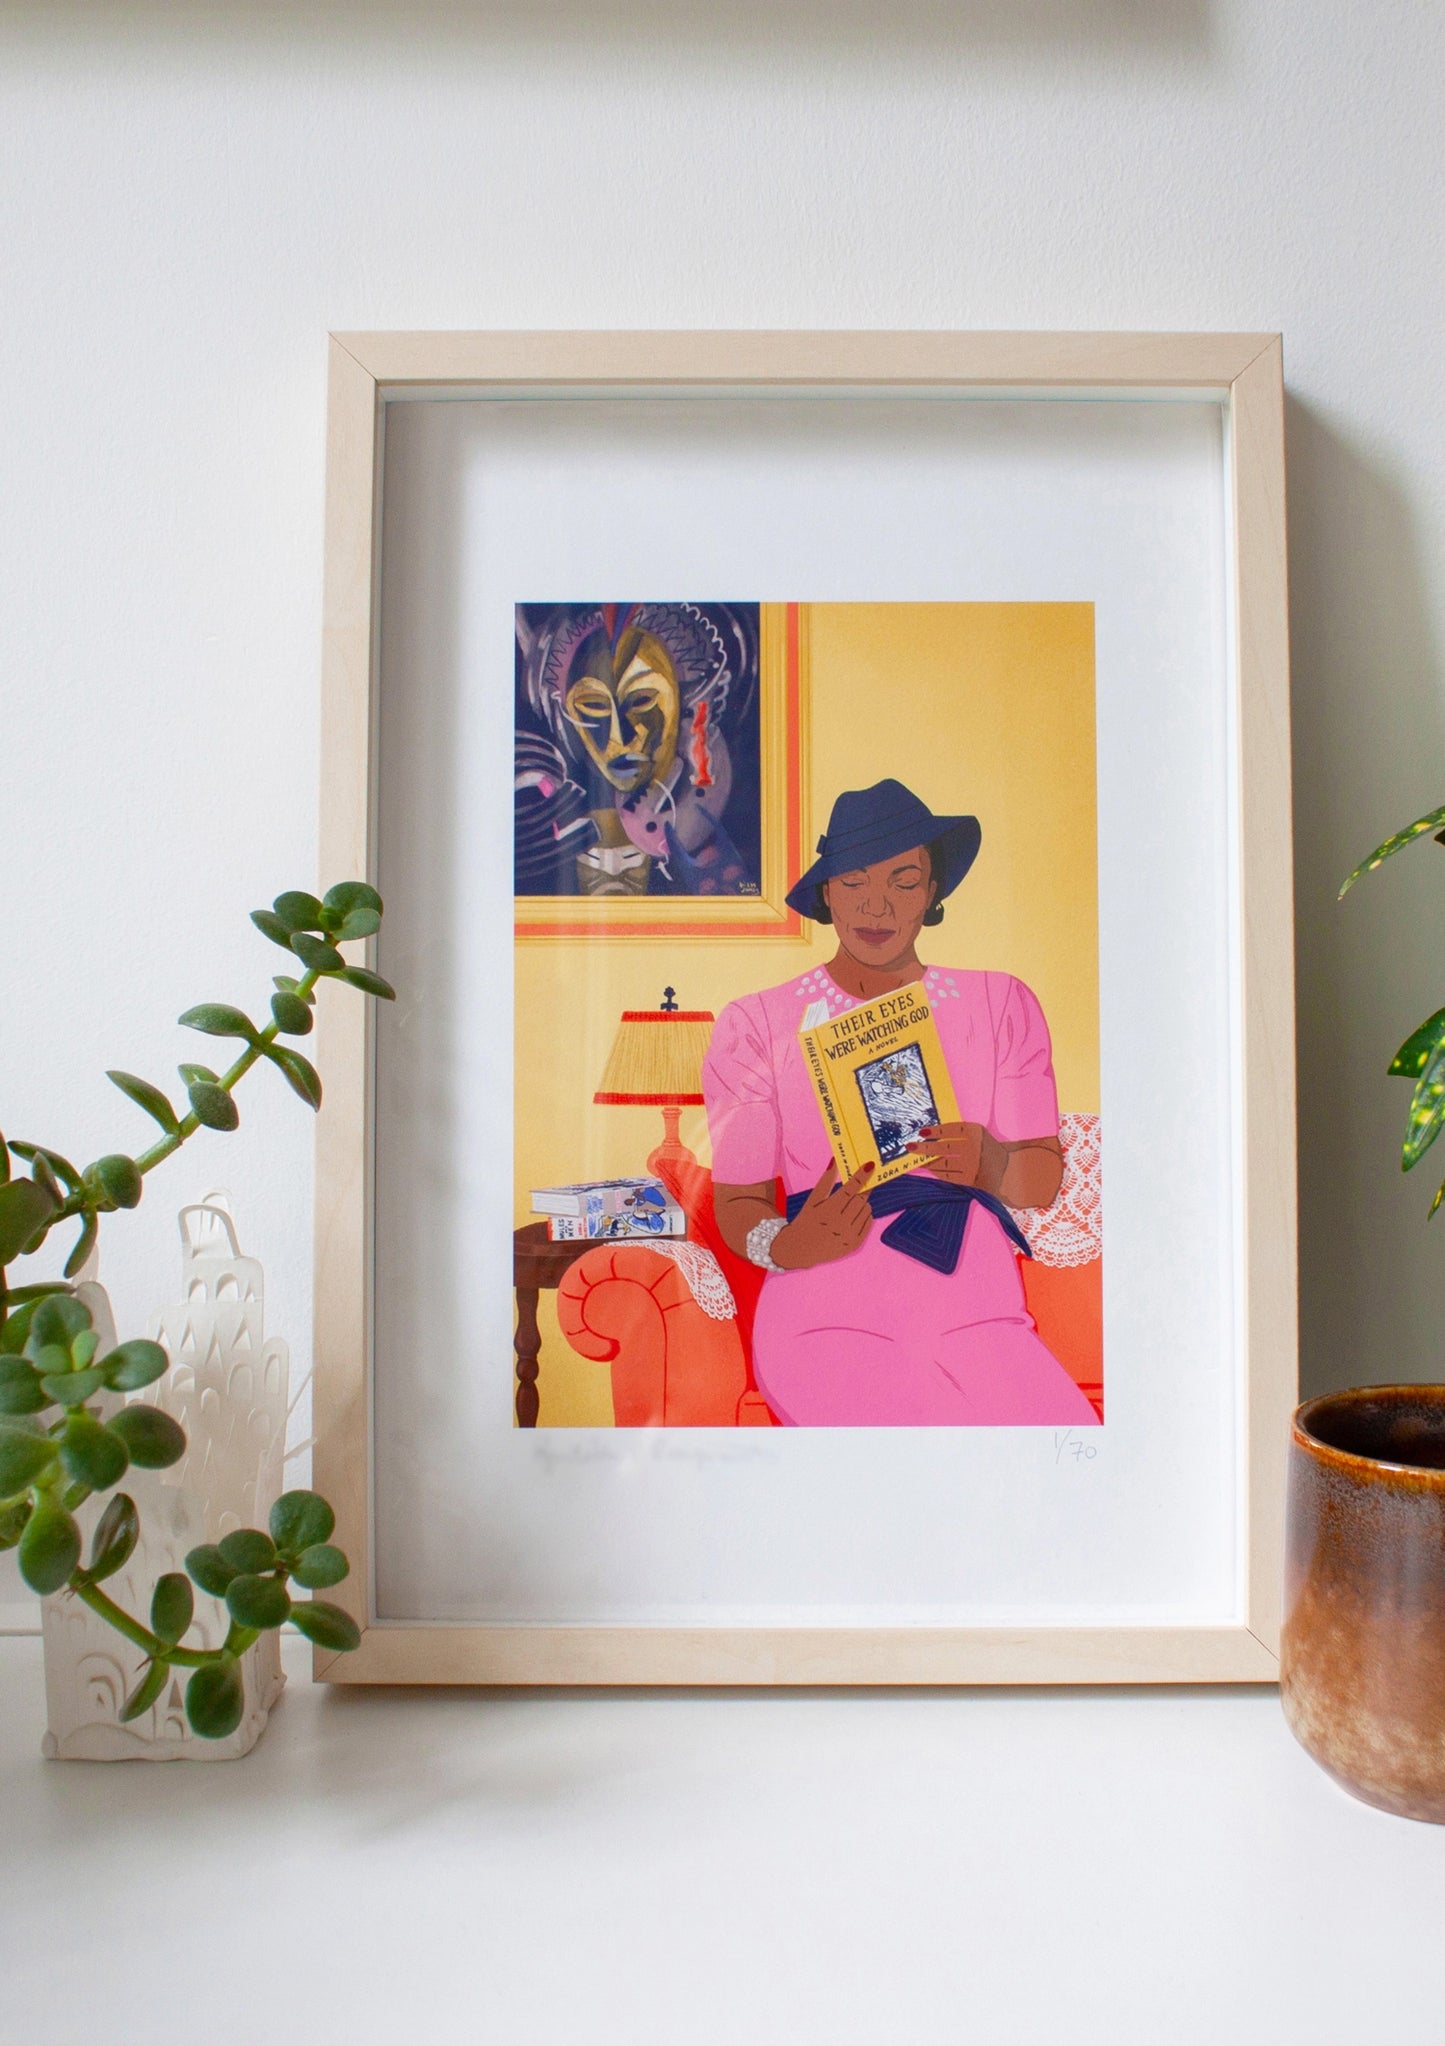 Framed illustrated portrait of Zora Neale Hurston in her living room, reading her book. Behind here is a painting by Lois Mailou Jones, another important Black woman of the Harlem Renaissance.